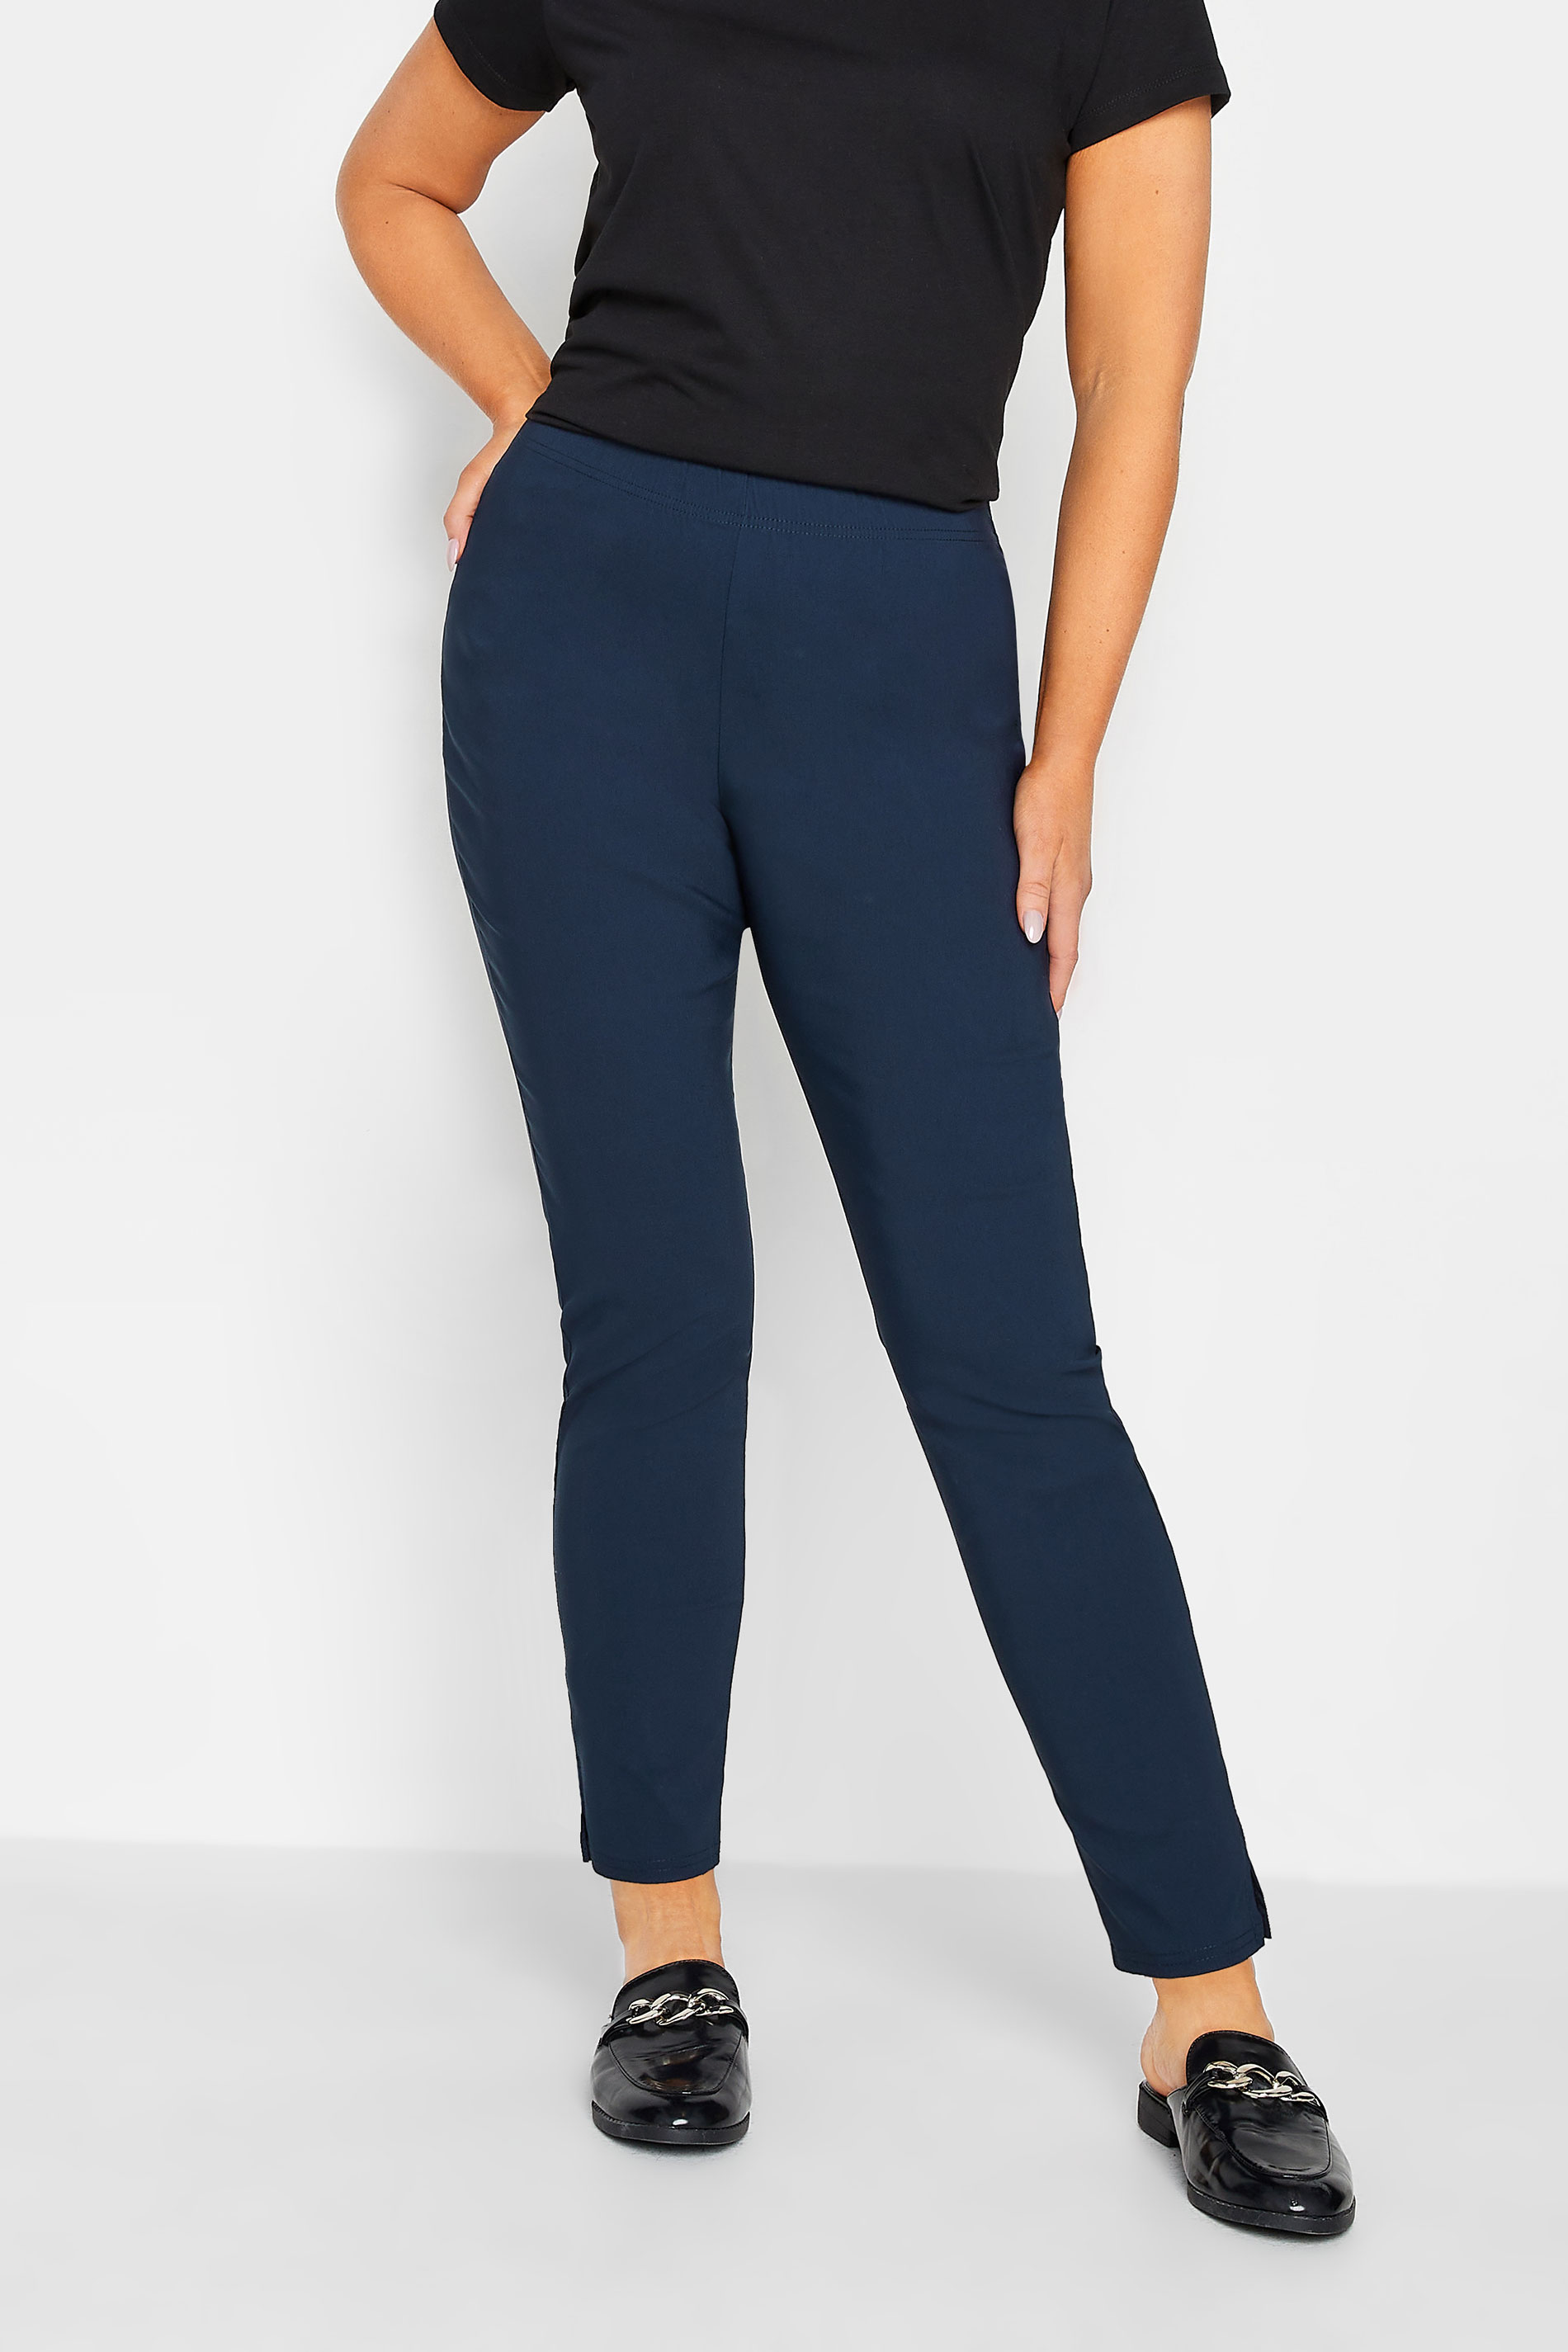 Camel Plaid stretch flat-front Women Trousers | Sumissura